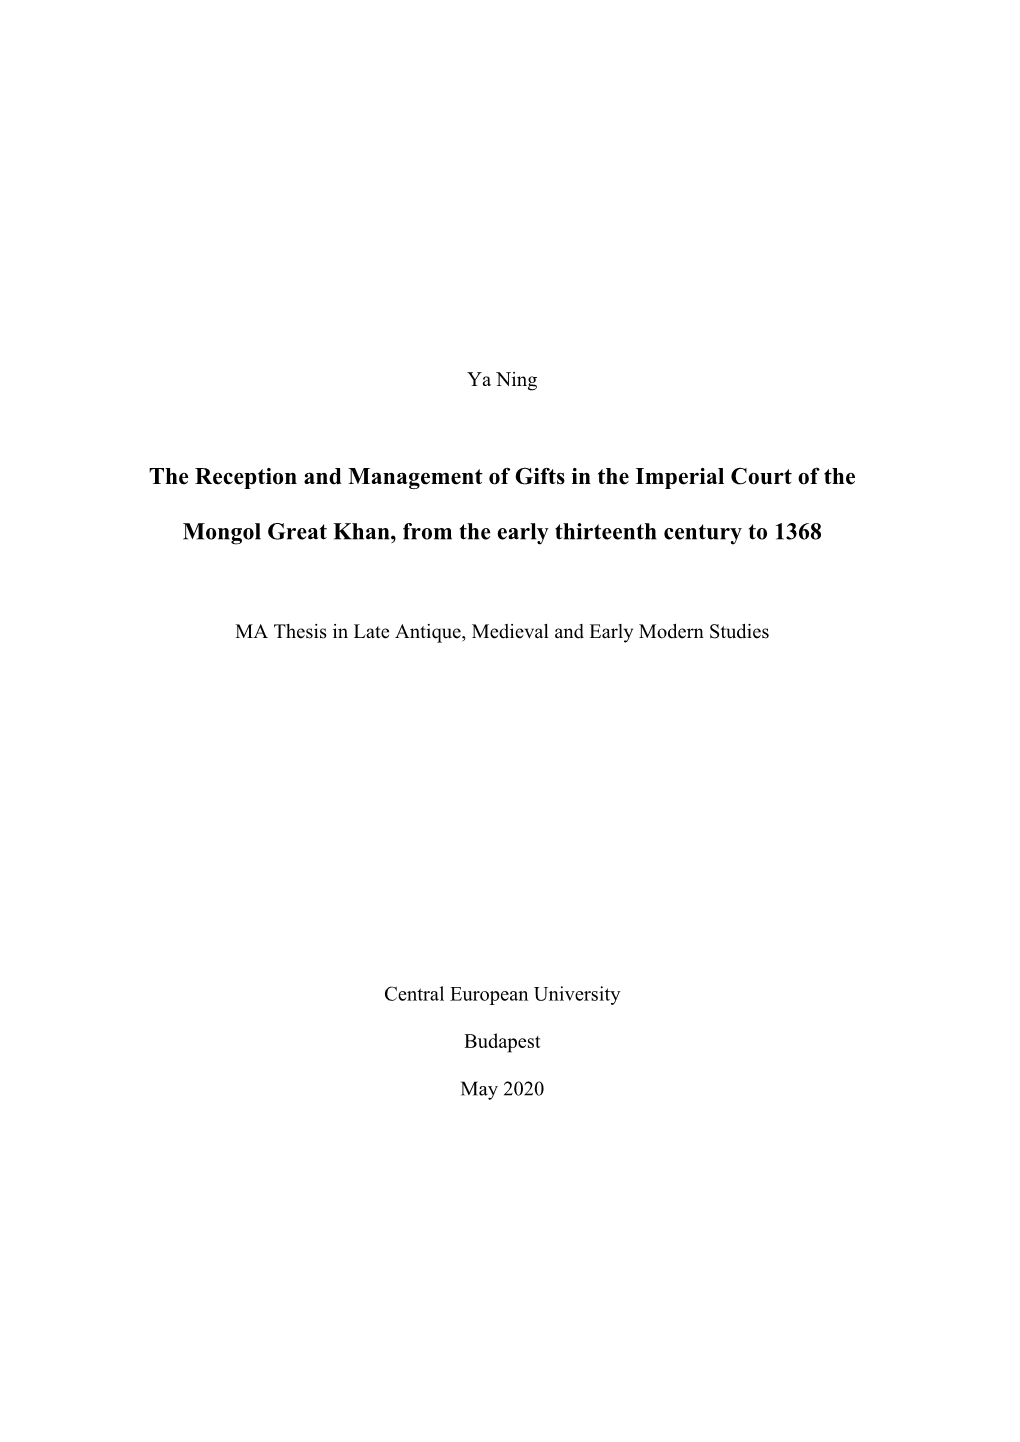 The Reception and Management of Gifts in the Imperial Court of the Mongol Great Khan, from the Early Thirteenth Century to 1368